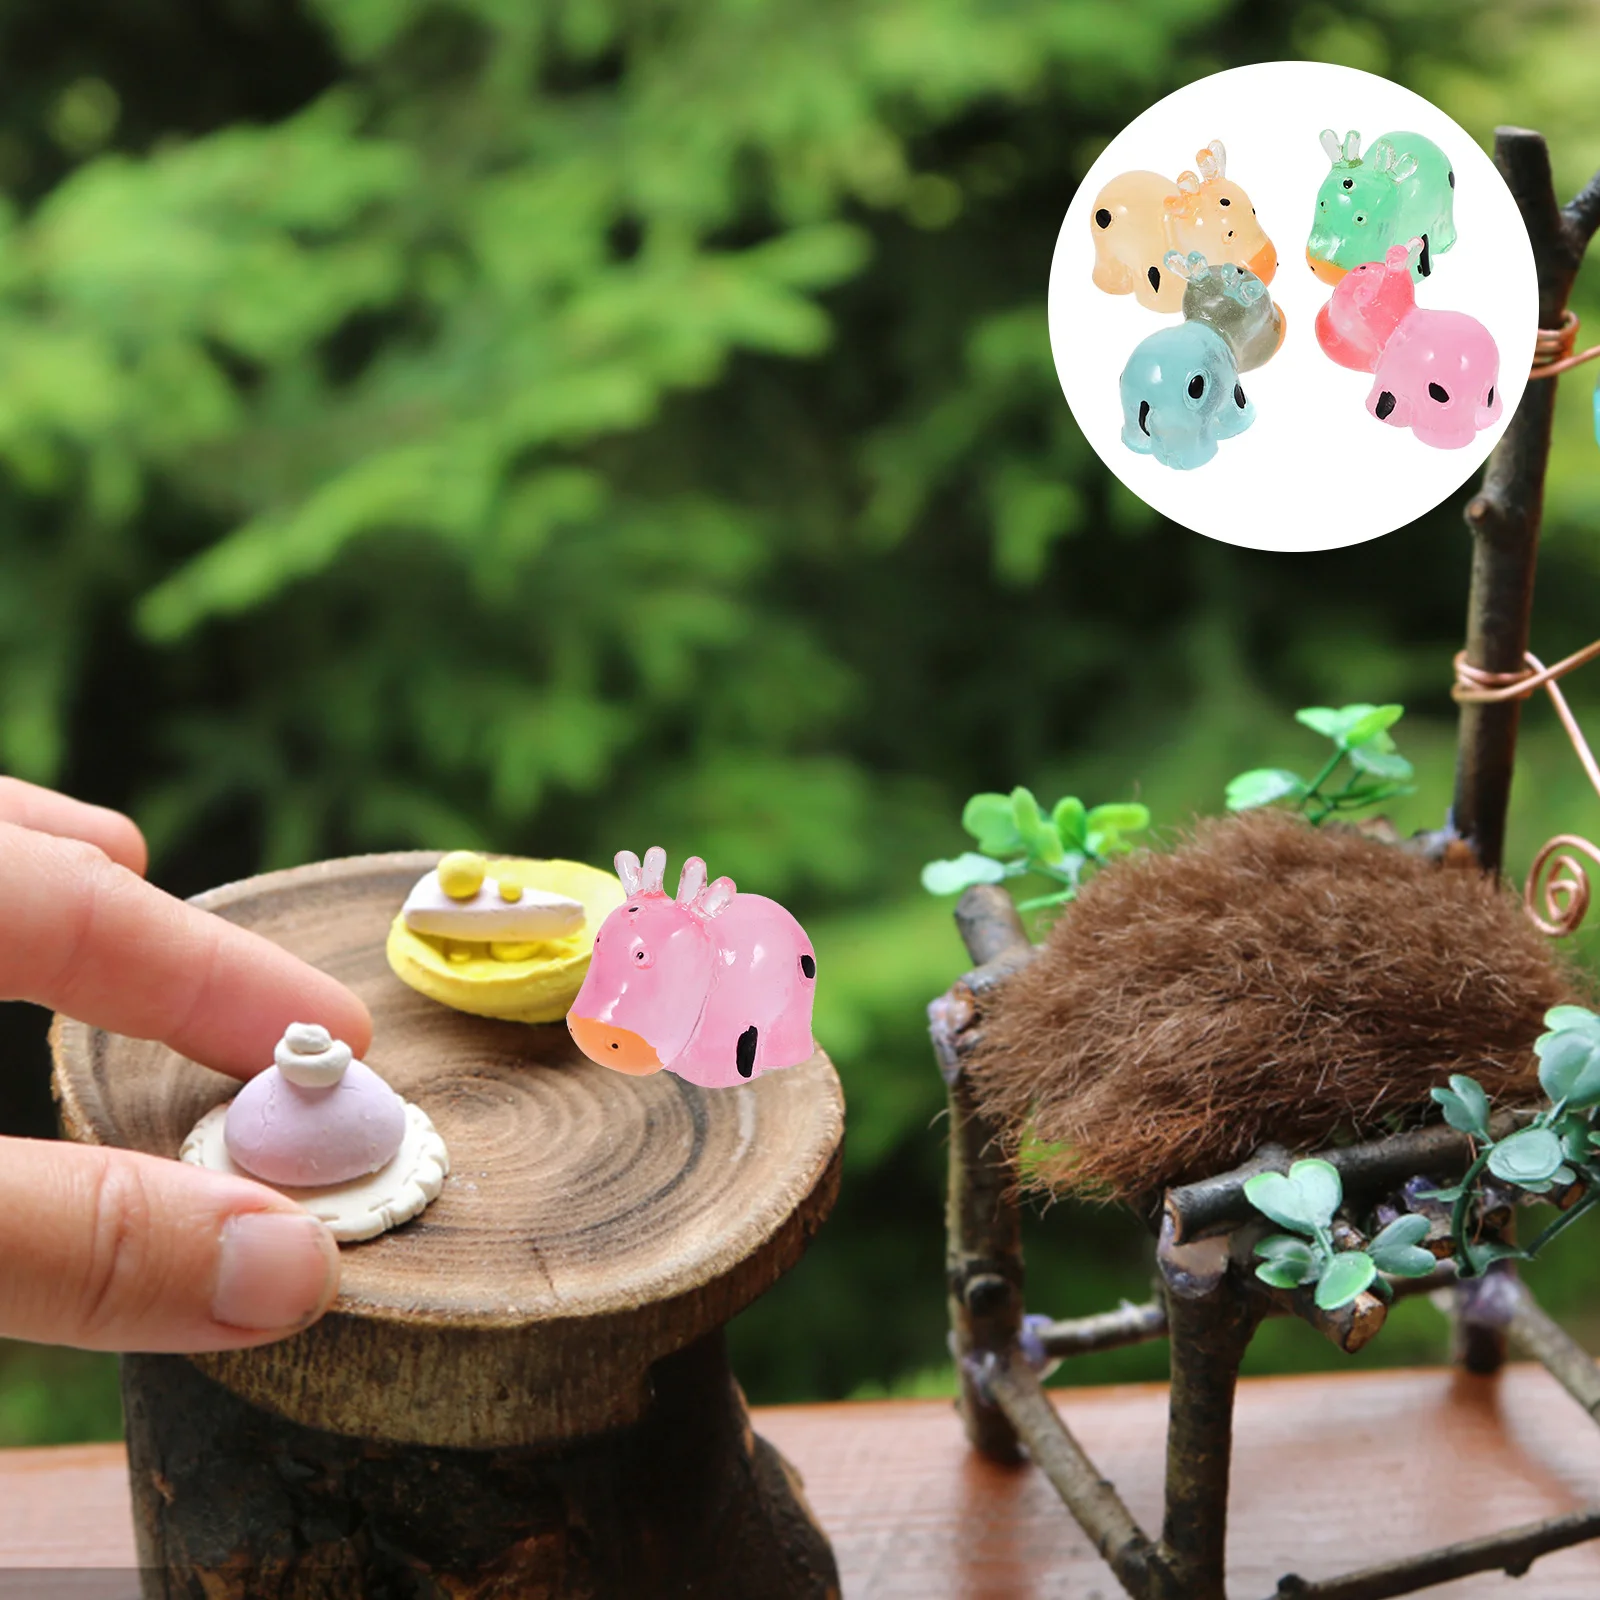 

8 Pcs Tabletop Lovely Animal Ornament Miniature Resin Cow Modeling Figurines Crafts Decors Desktop Accessories